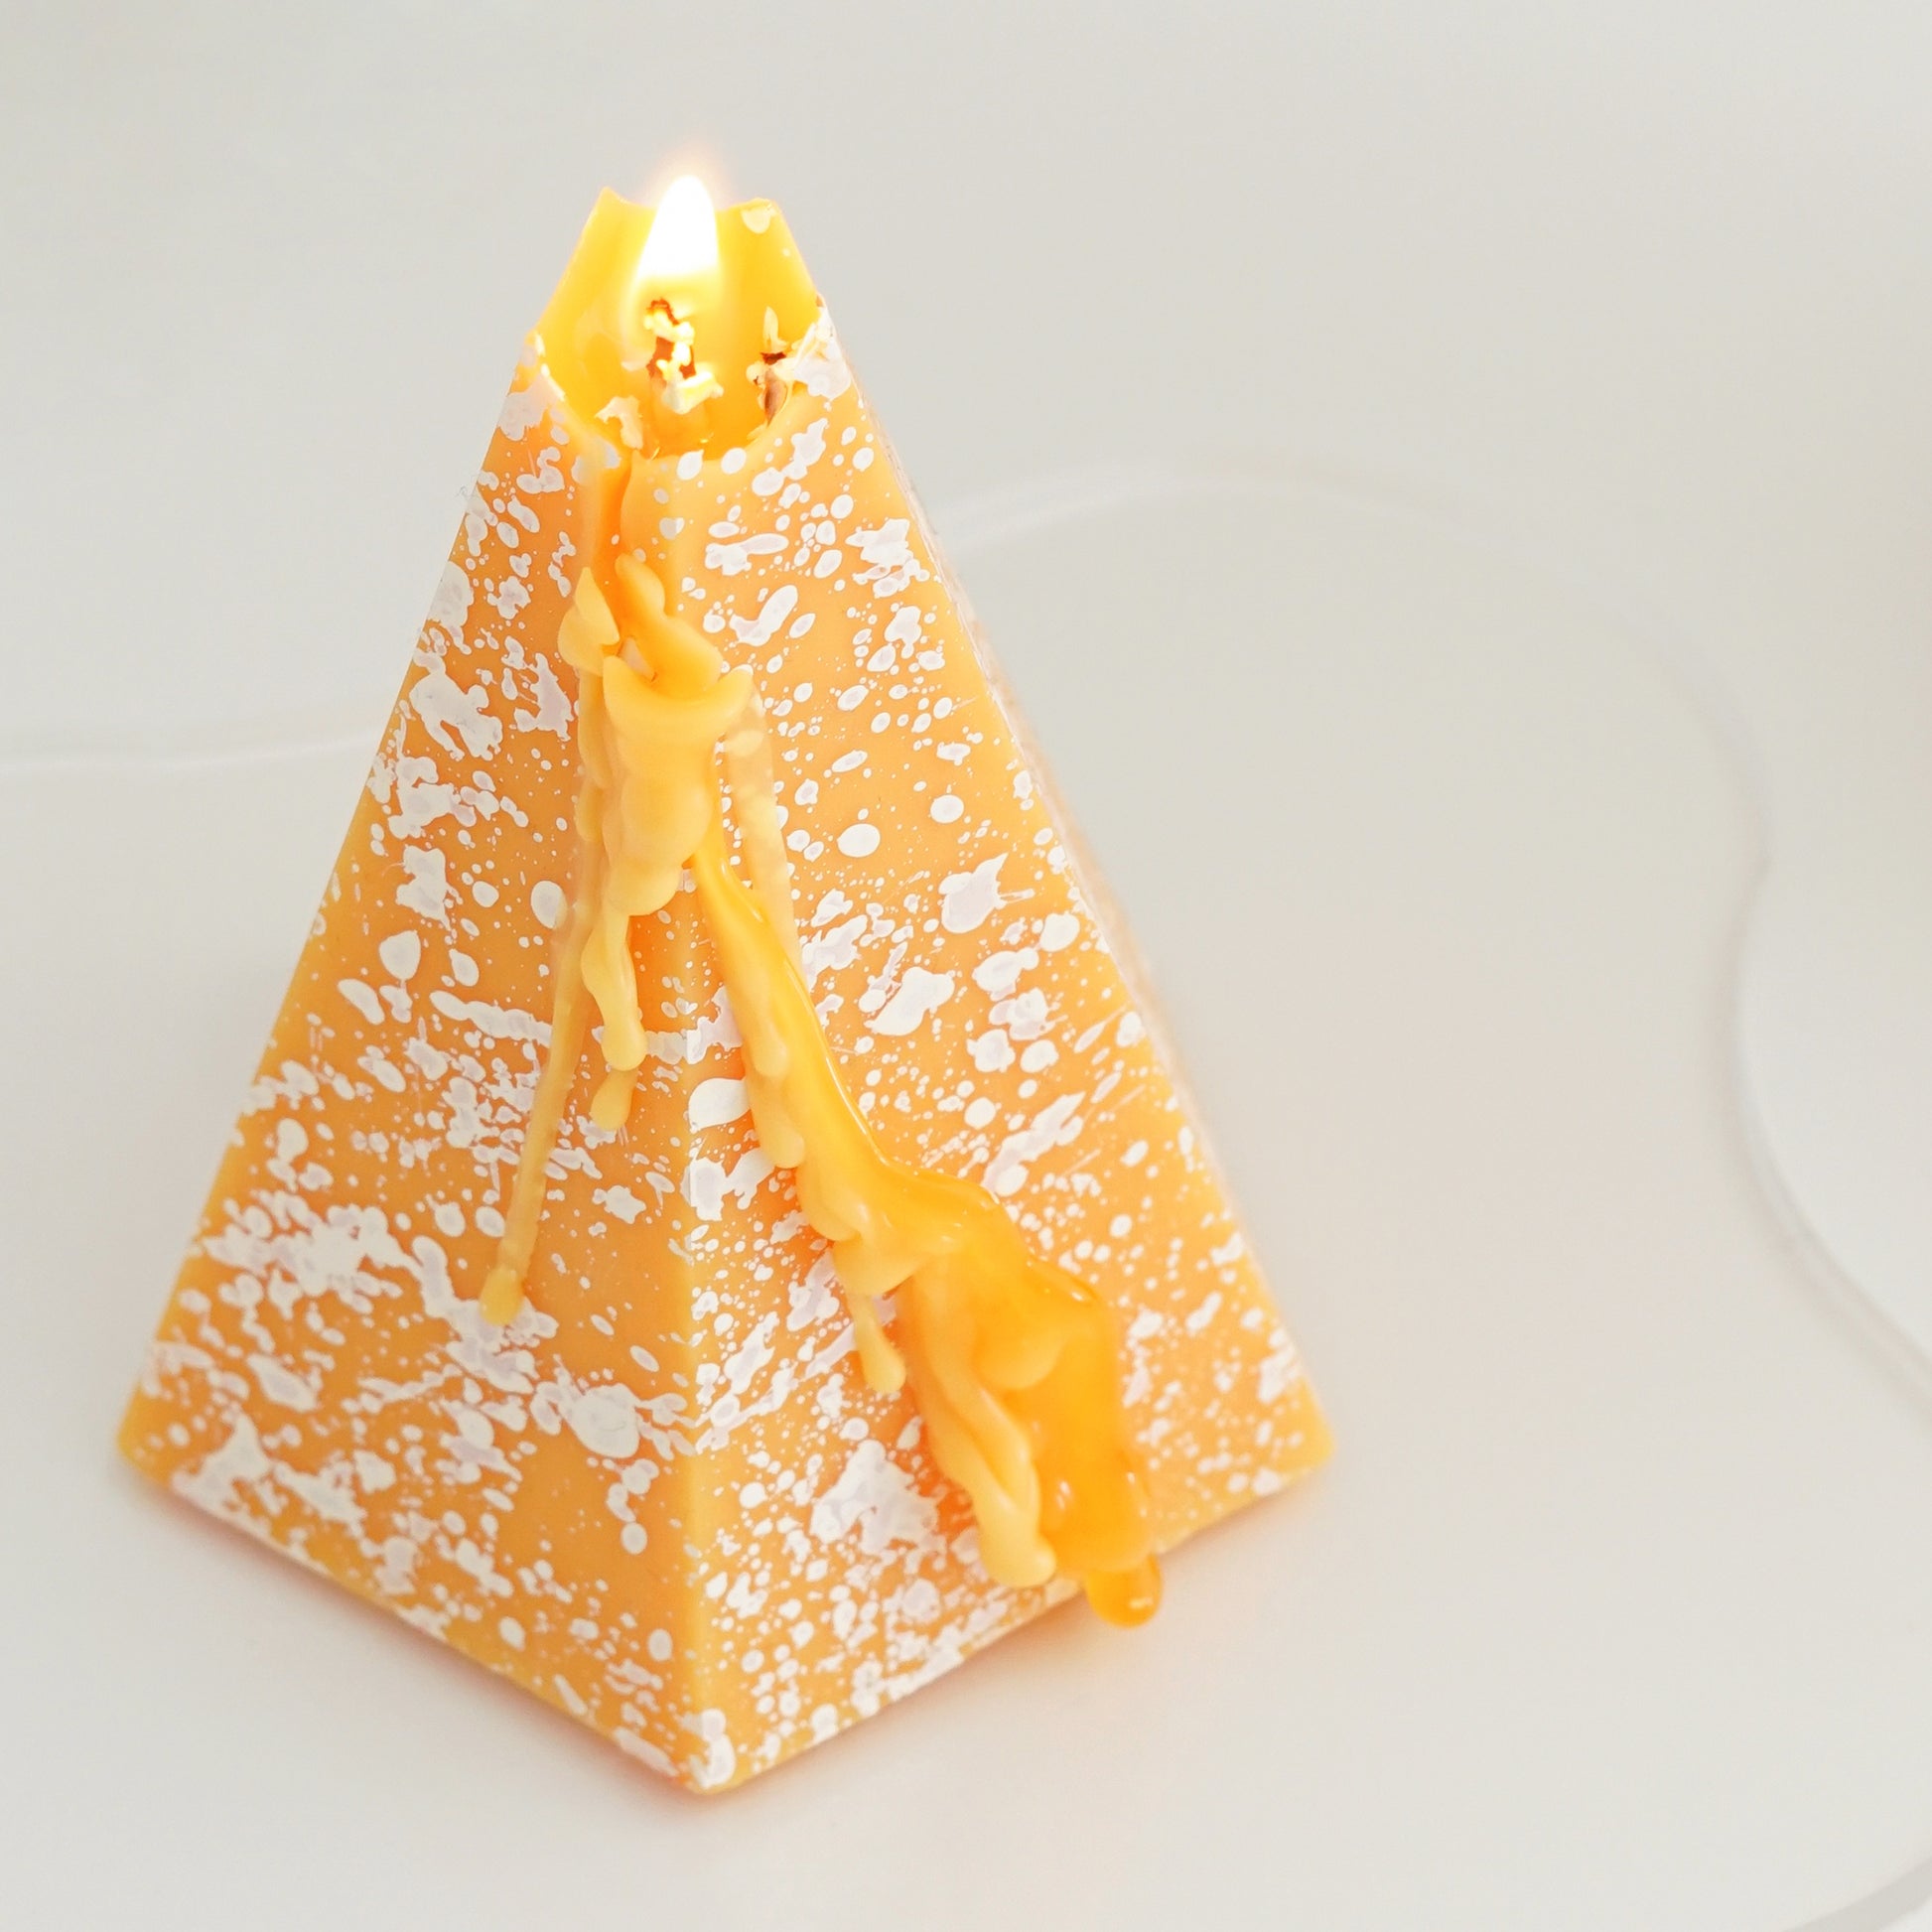 a lit yellow pentagonal pyramid shape soy pillar candle with white splatter pattern on clear wavy acrylic coaster